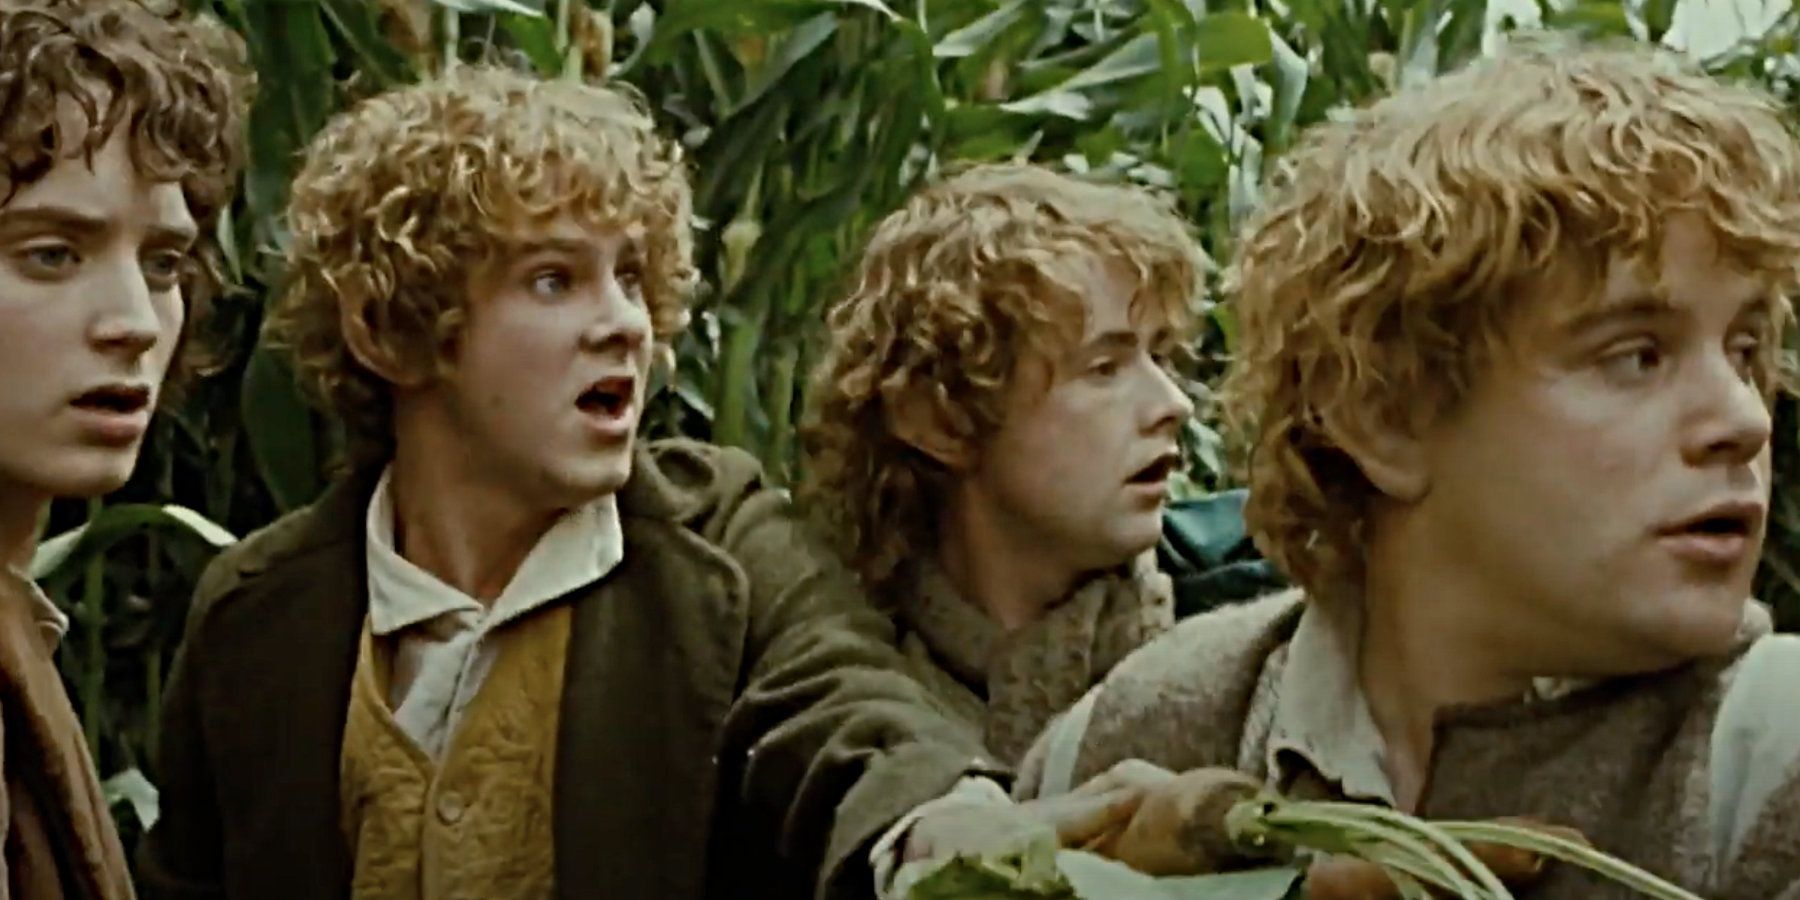 Merry and Pippin Stealing Crops